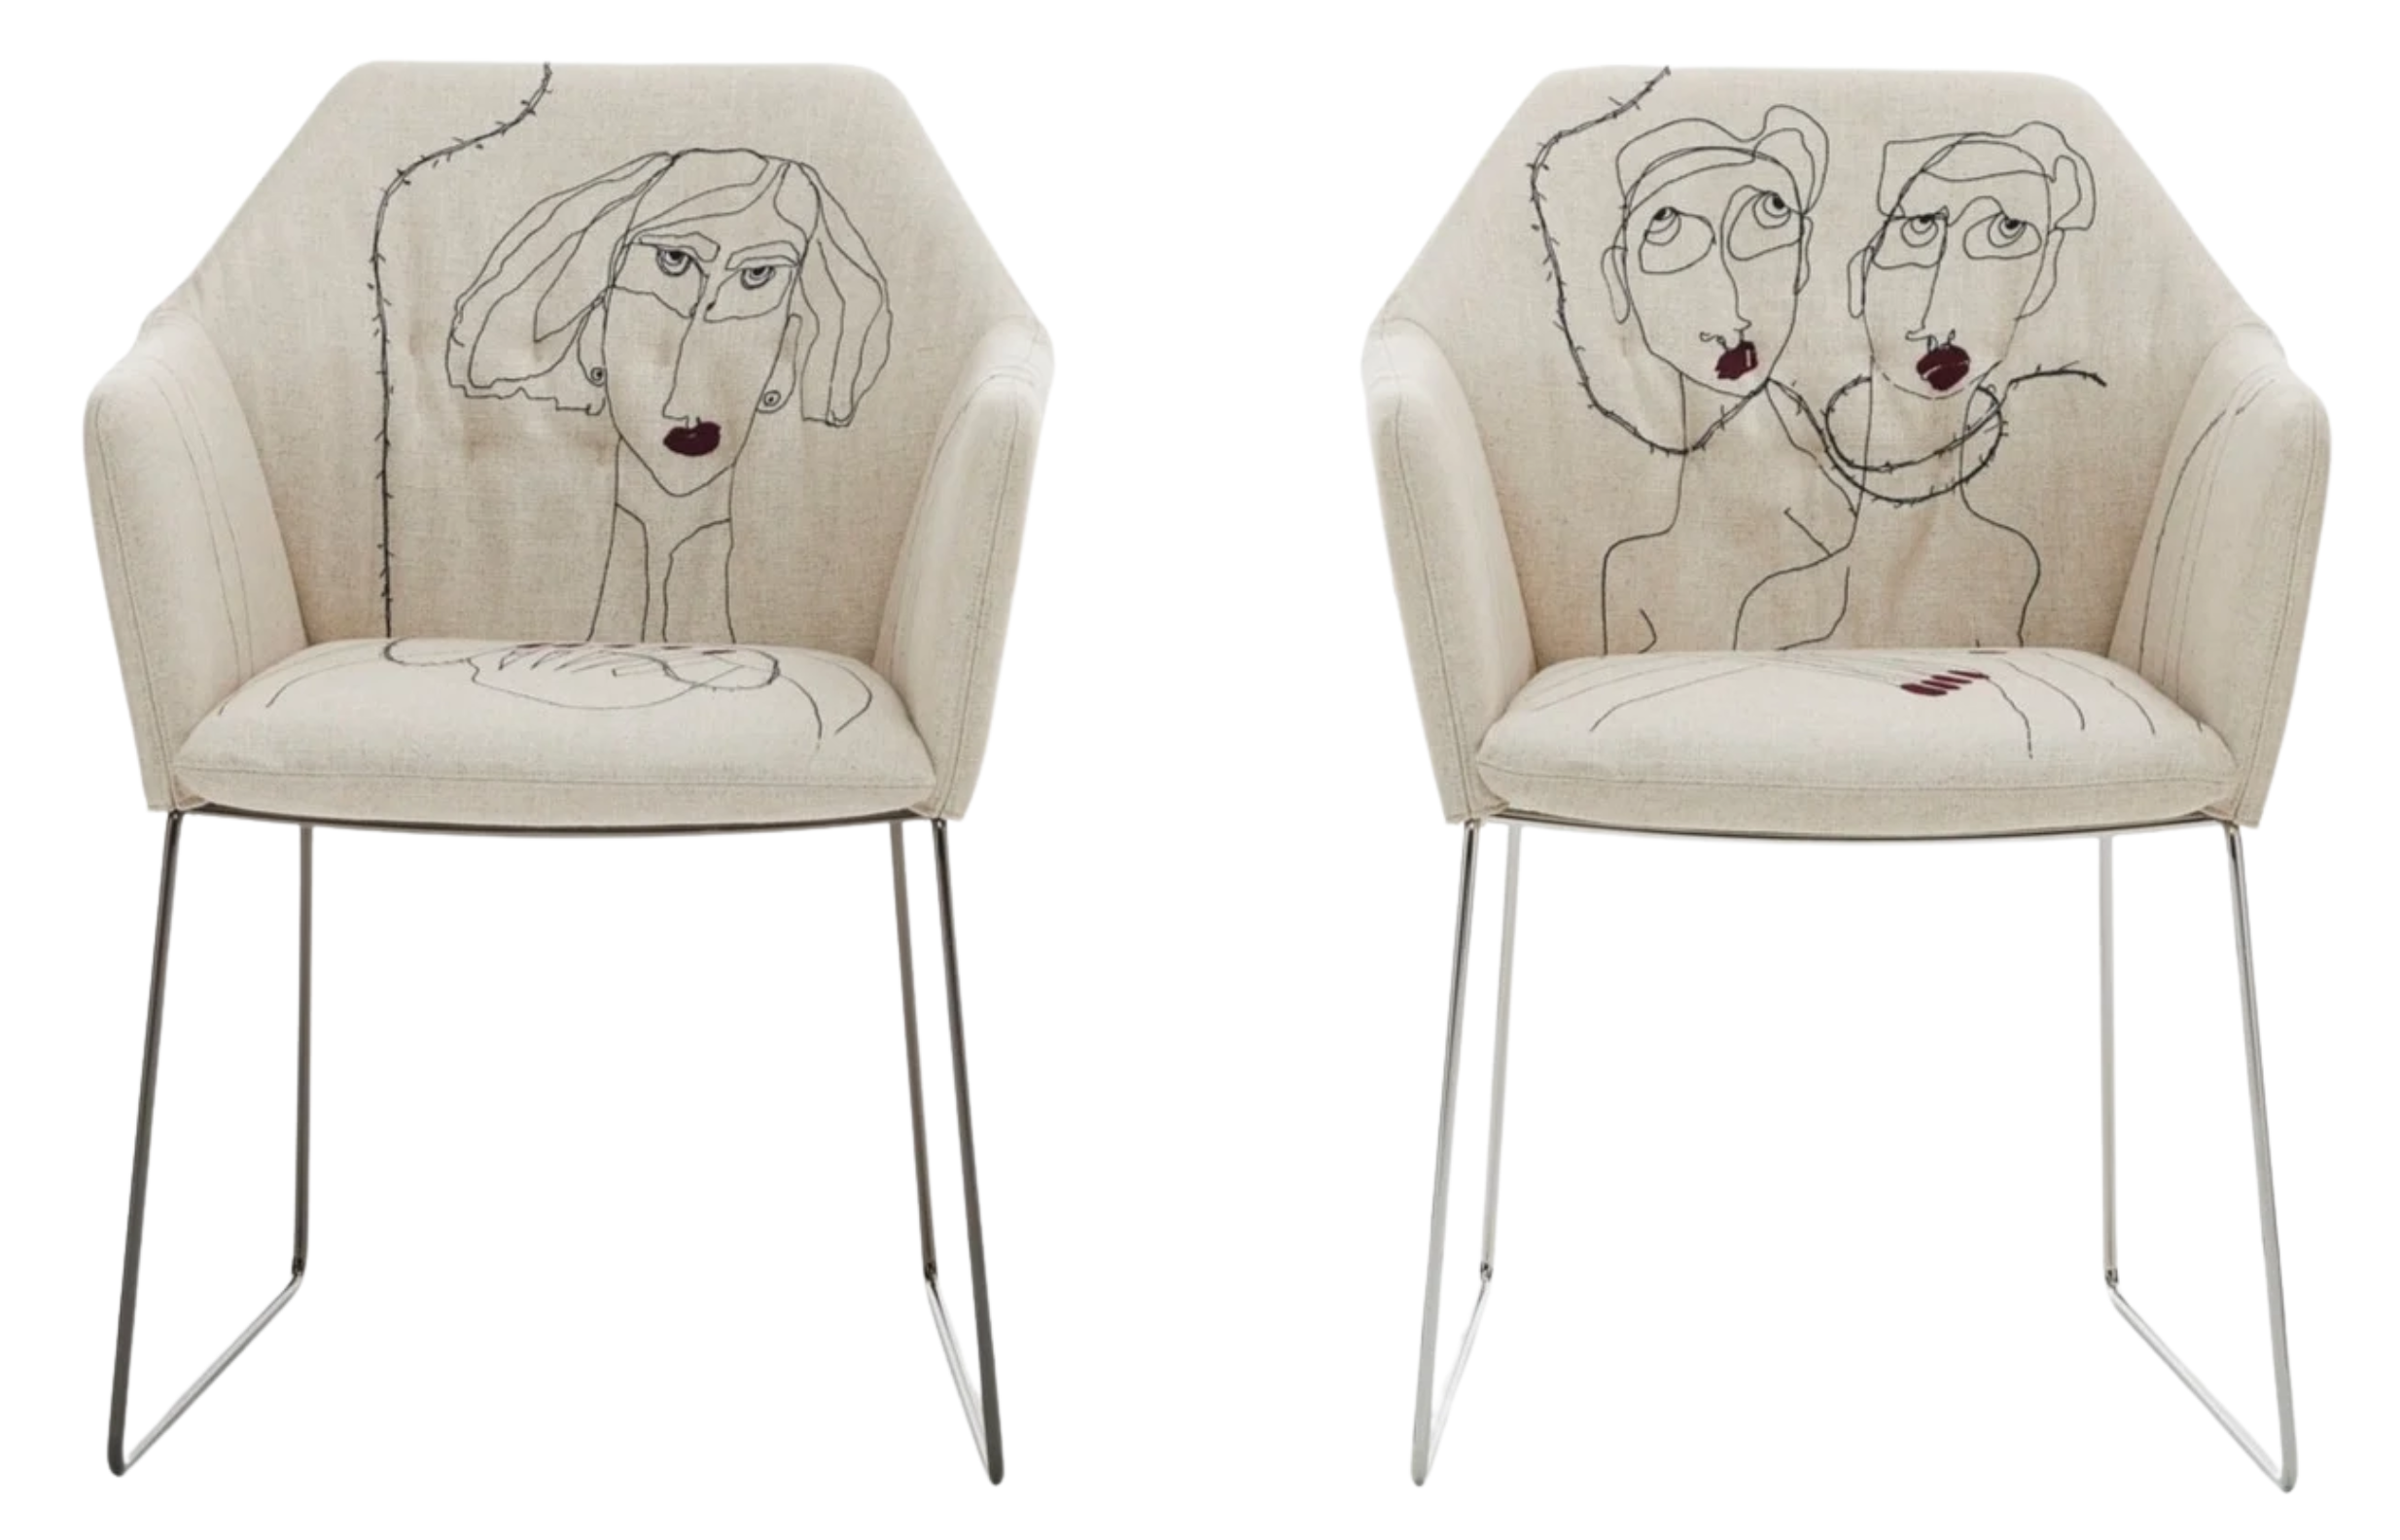 two white chairs with images of people stitched on them 